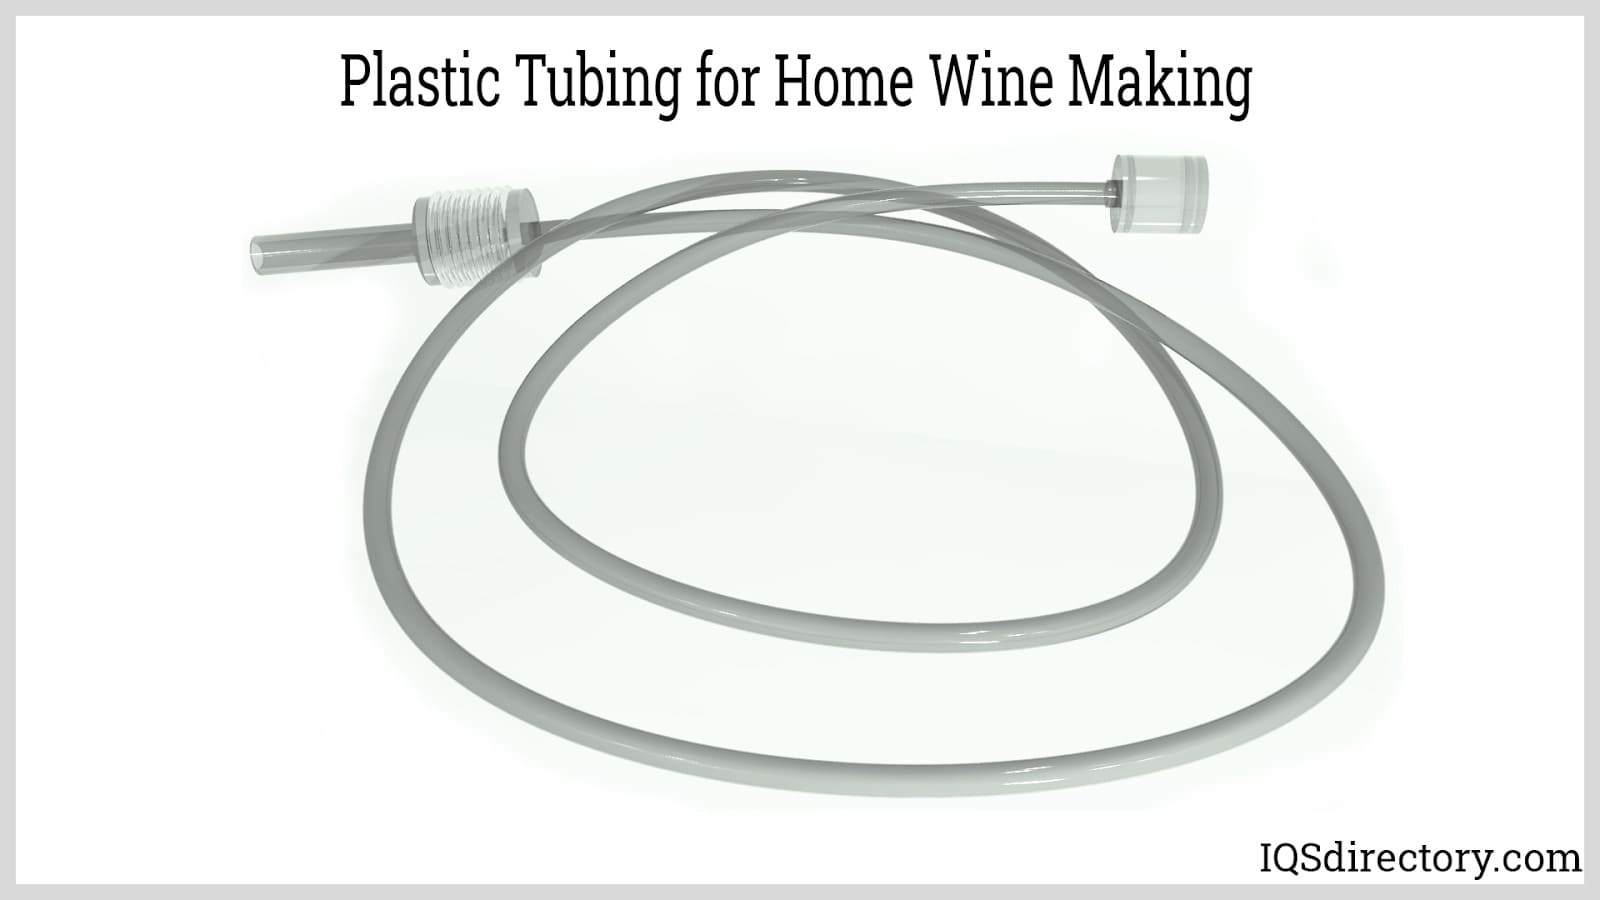 Plastic Tubing for Home Wine Making